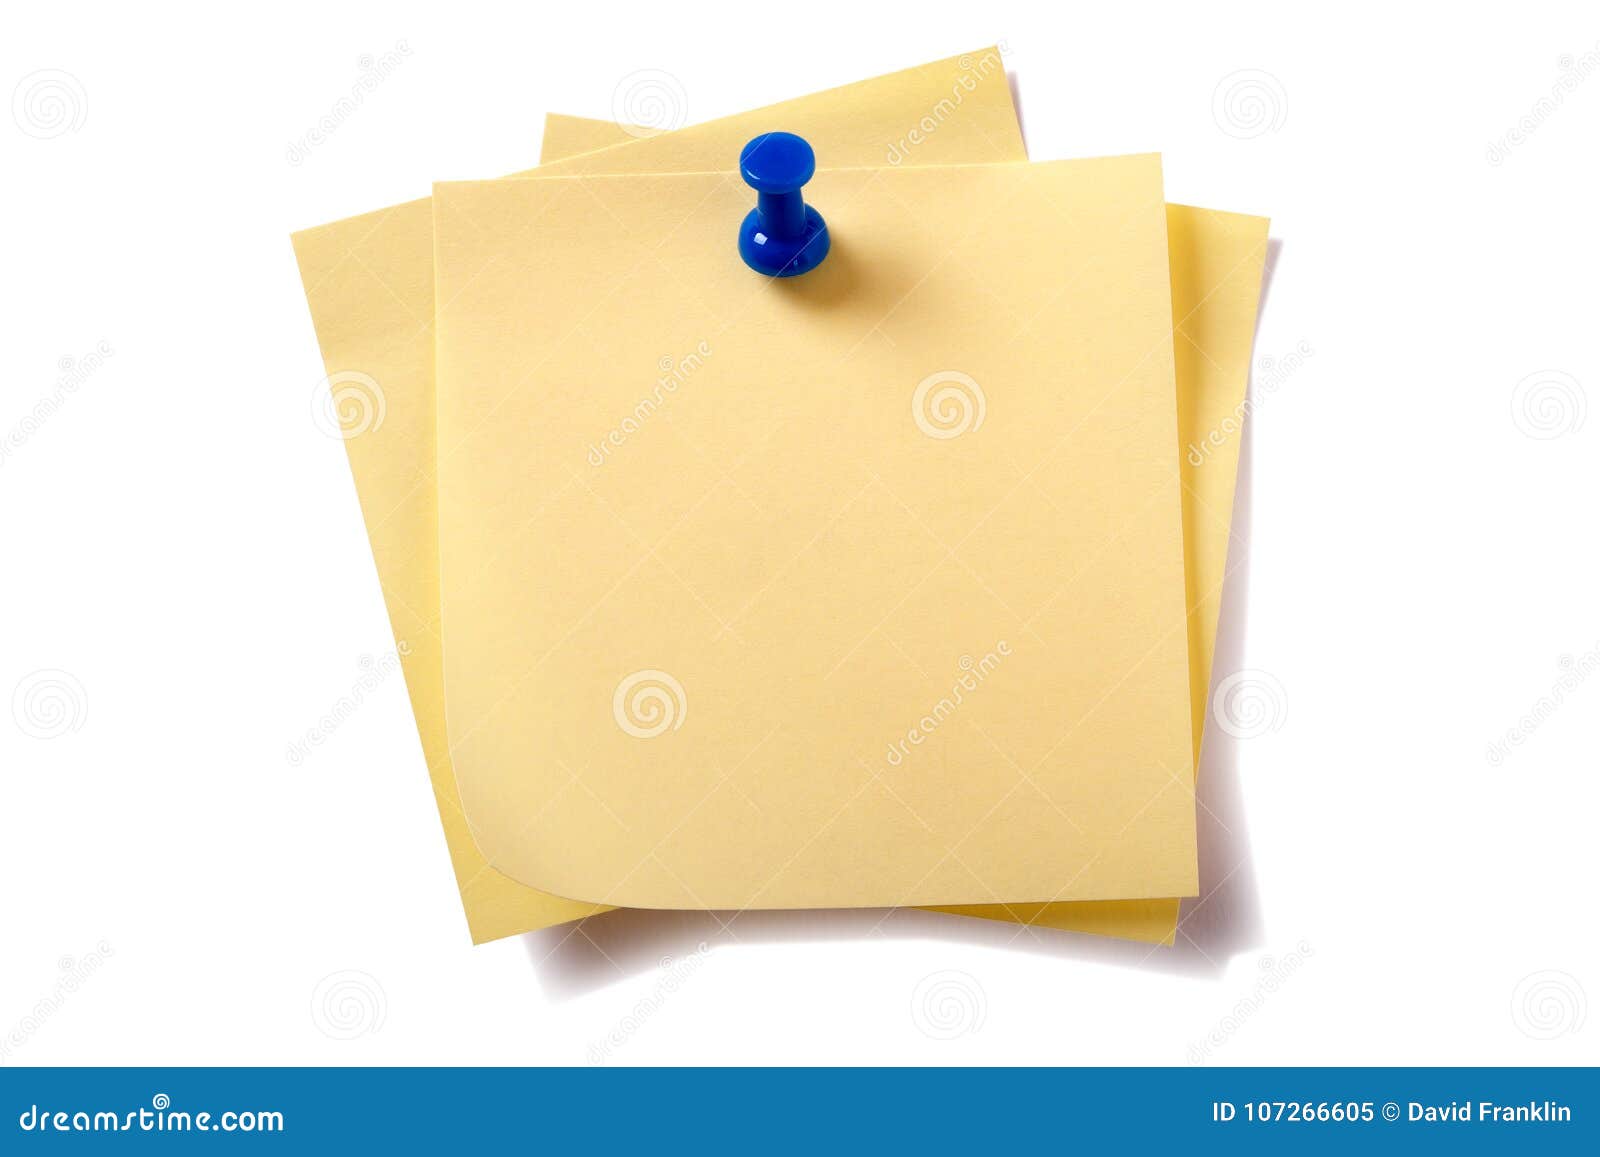 Yellow post it notes Stock Photo by ©ladyann 16640773